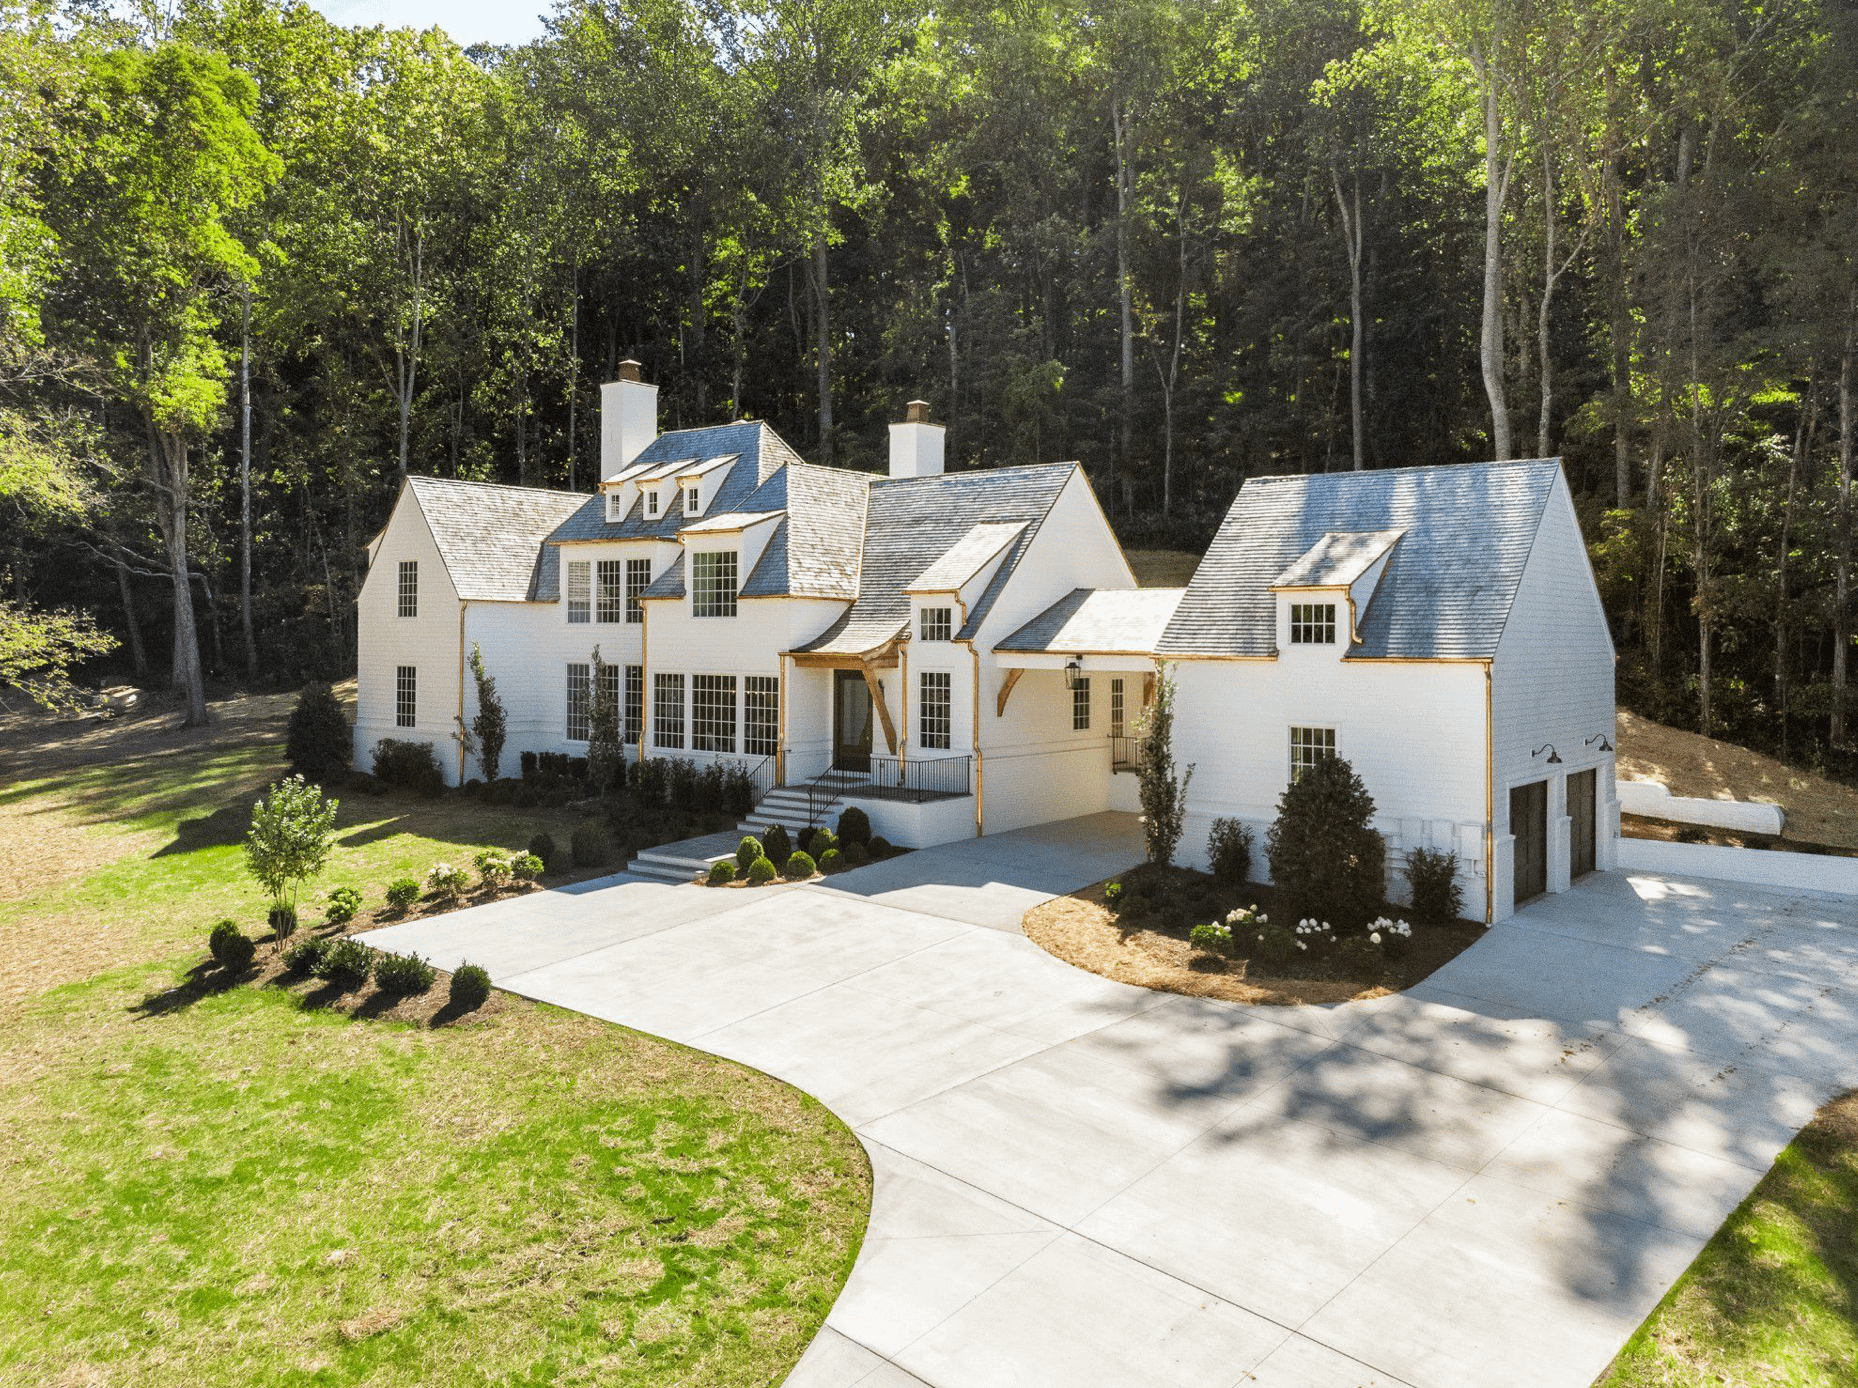 Tennessee New Build On 10 Acres (PHOTOS)